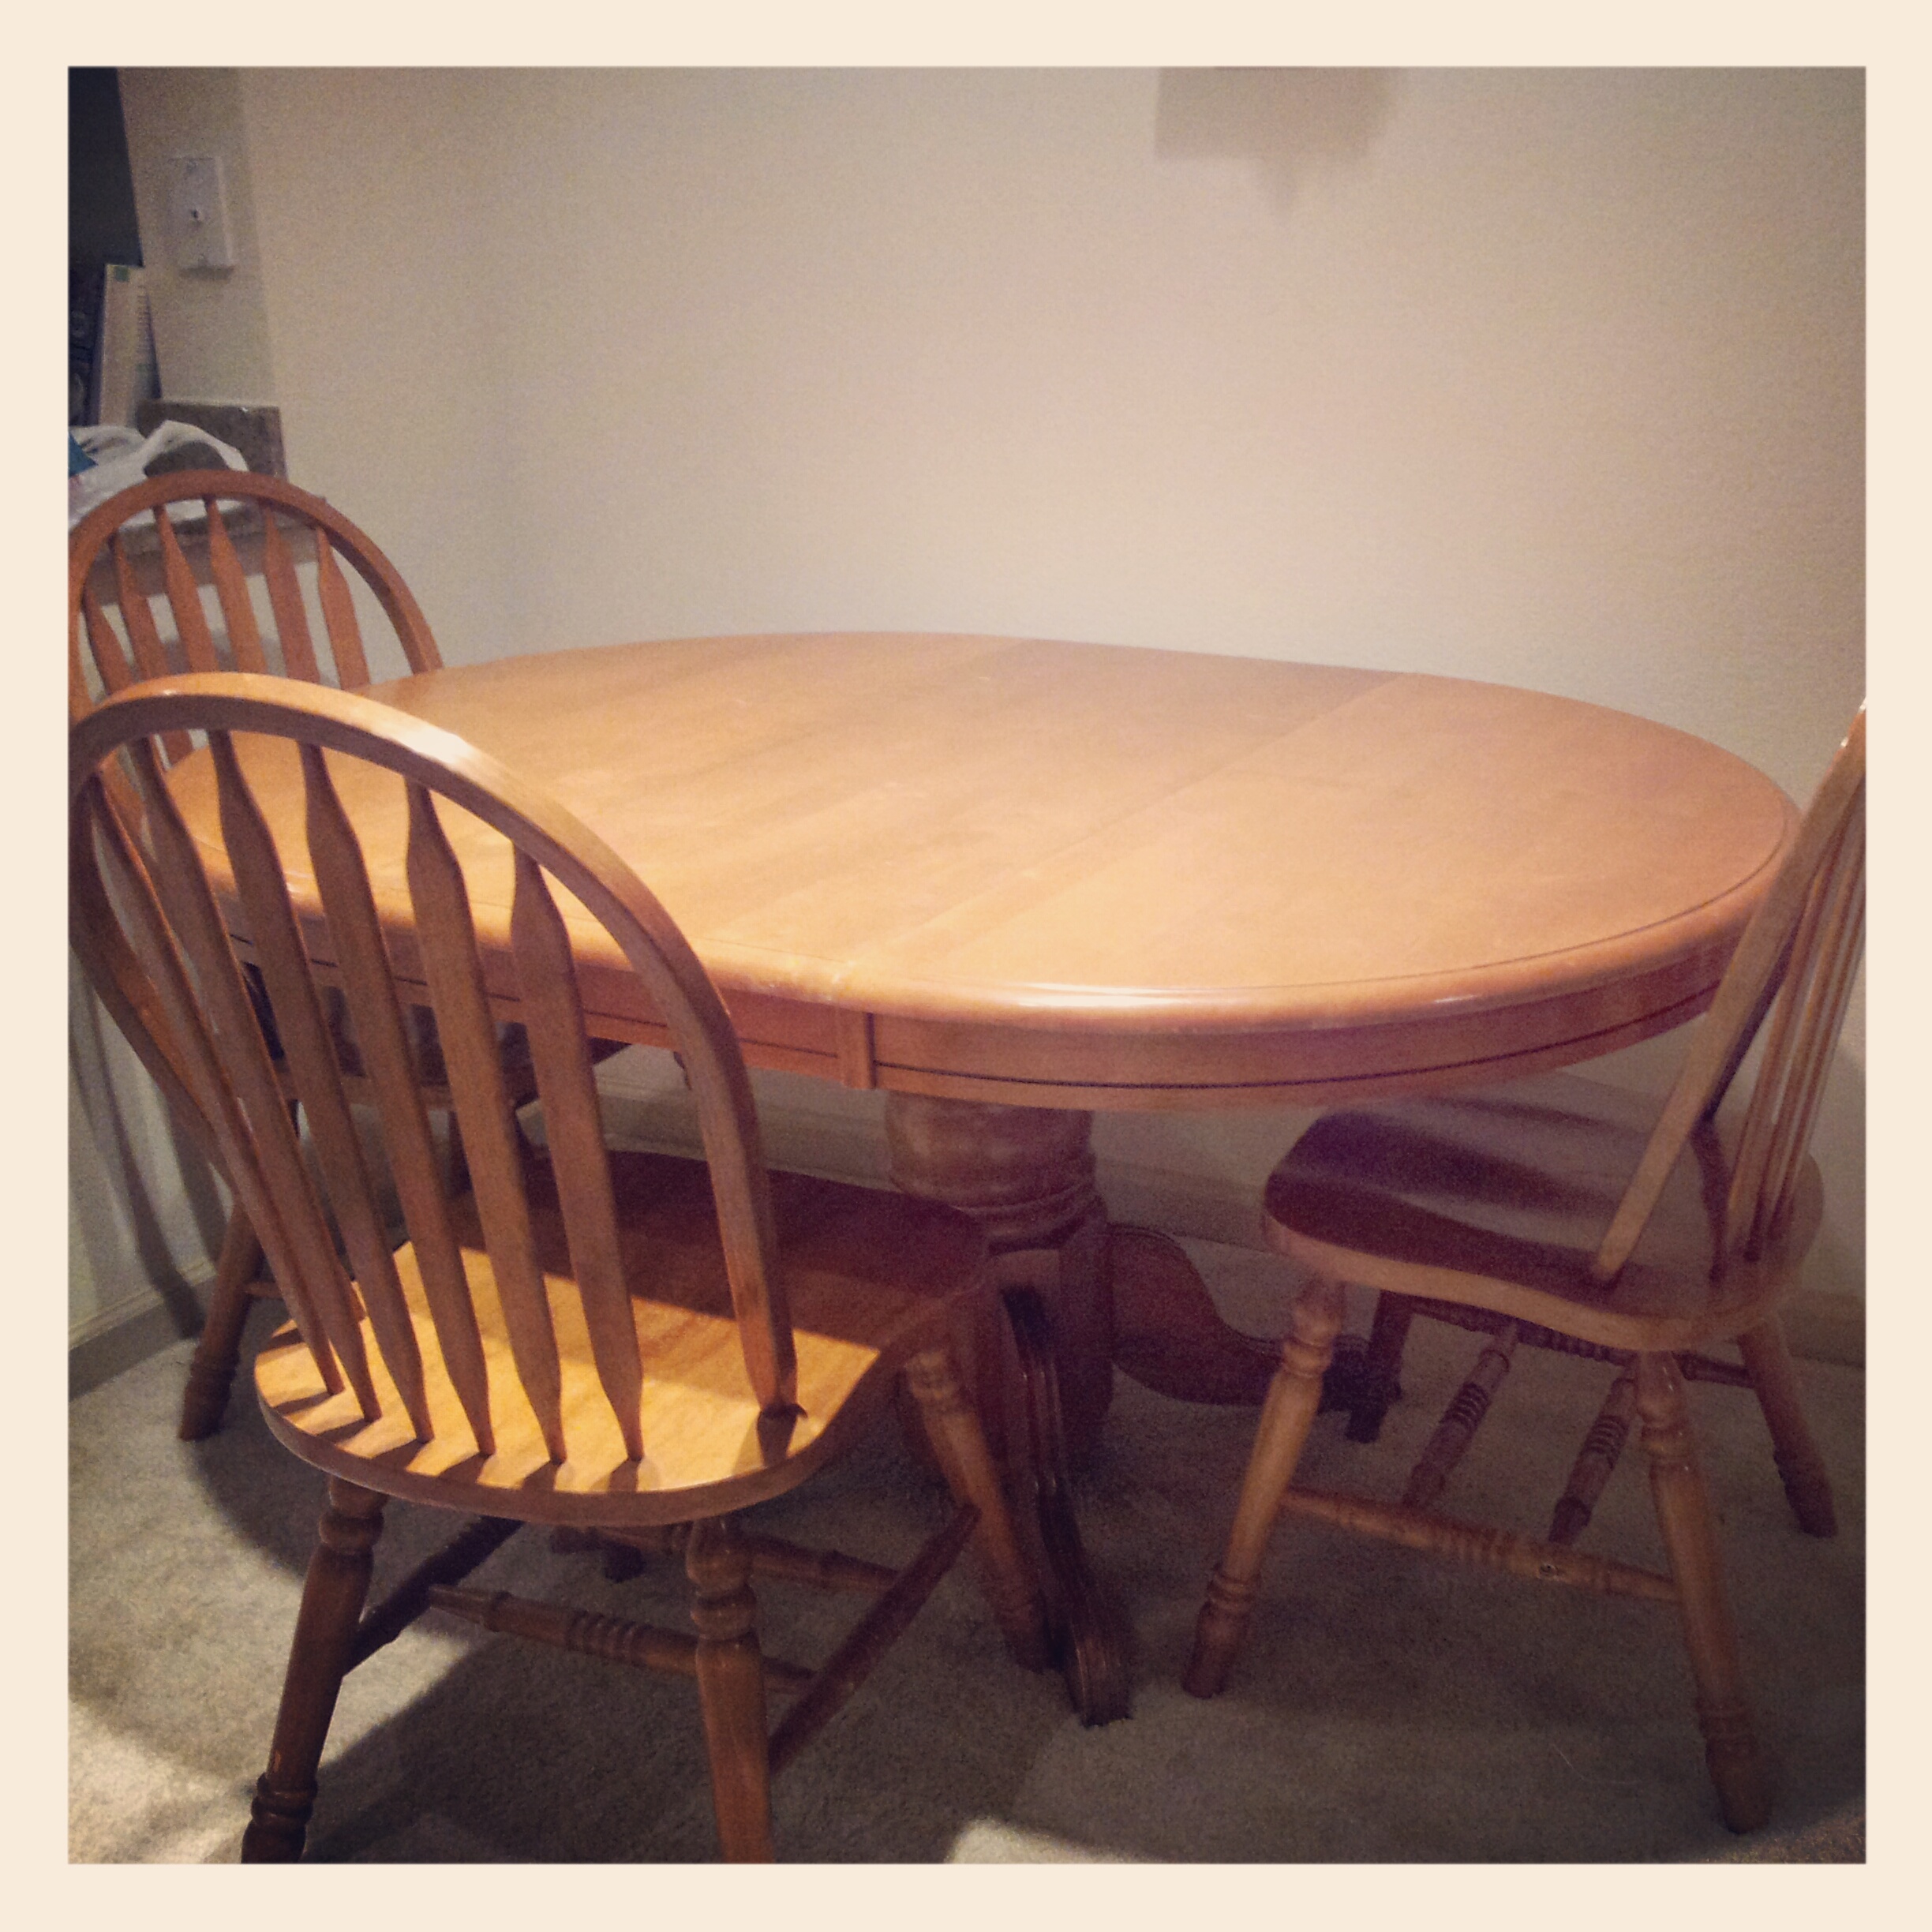 Dining Room Table and chairs